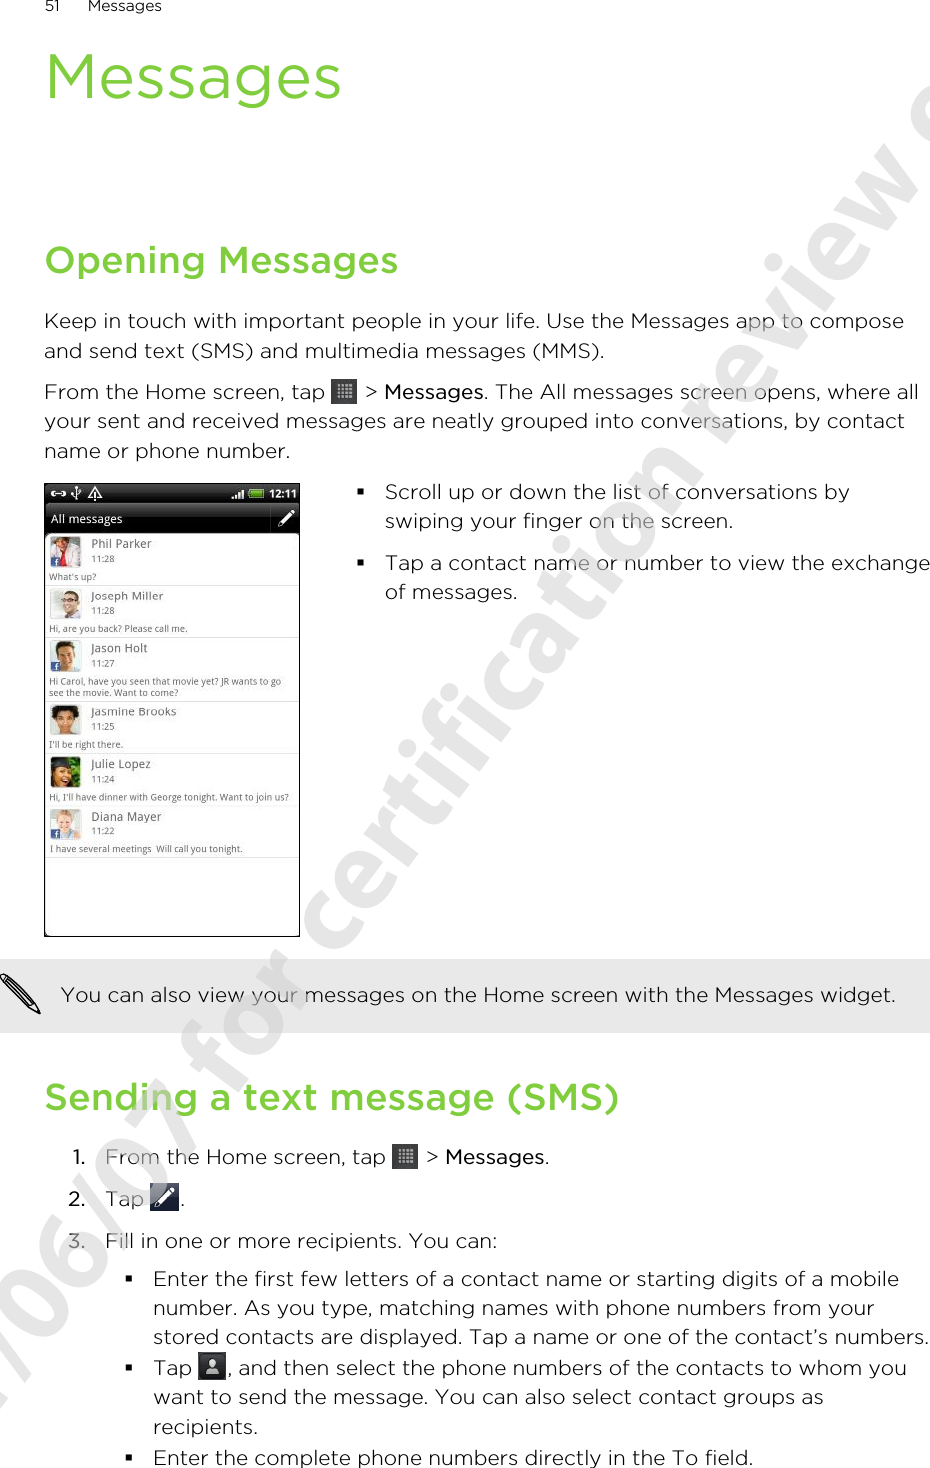 MessagesOpening MessagesKeep in touch with important people in your life. Use the Messages app to composeand send text (SMS) and multimedia messages (MMS).From the Home screen, tap   &gt; Messages. The All messages screen opens, where allyour sent and received messages are neatly grouped into conversations, by contactname or phone number.§Scroll up or down the list of conversations byswiping your finger on the screen.§Tap a contact name or number to view the exchangeof messages.You can also view your messages on the Home screen with the Messages widget.Sending a text message (SMS)1. From the Home screen, tap   &gt; Messages.2. Tap  .3. Fill in one or more recipients. You can:§Enter the first few letters of a contact name or starting digits of a mobilenumber. As you type, matching names with phone numbers from yourstored contacts are displayed. Tap a name or one of the contact’s numbers.§Tap  , and then select the phone numbers of the contacts to whom youwant to send the message. You can also select contact groups asrecipients.§Enter the complete phone numbers directly in the To field.51 Messages2011/06/07 for certification review only